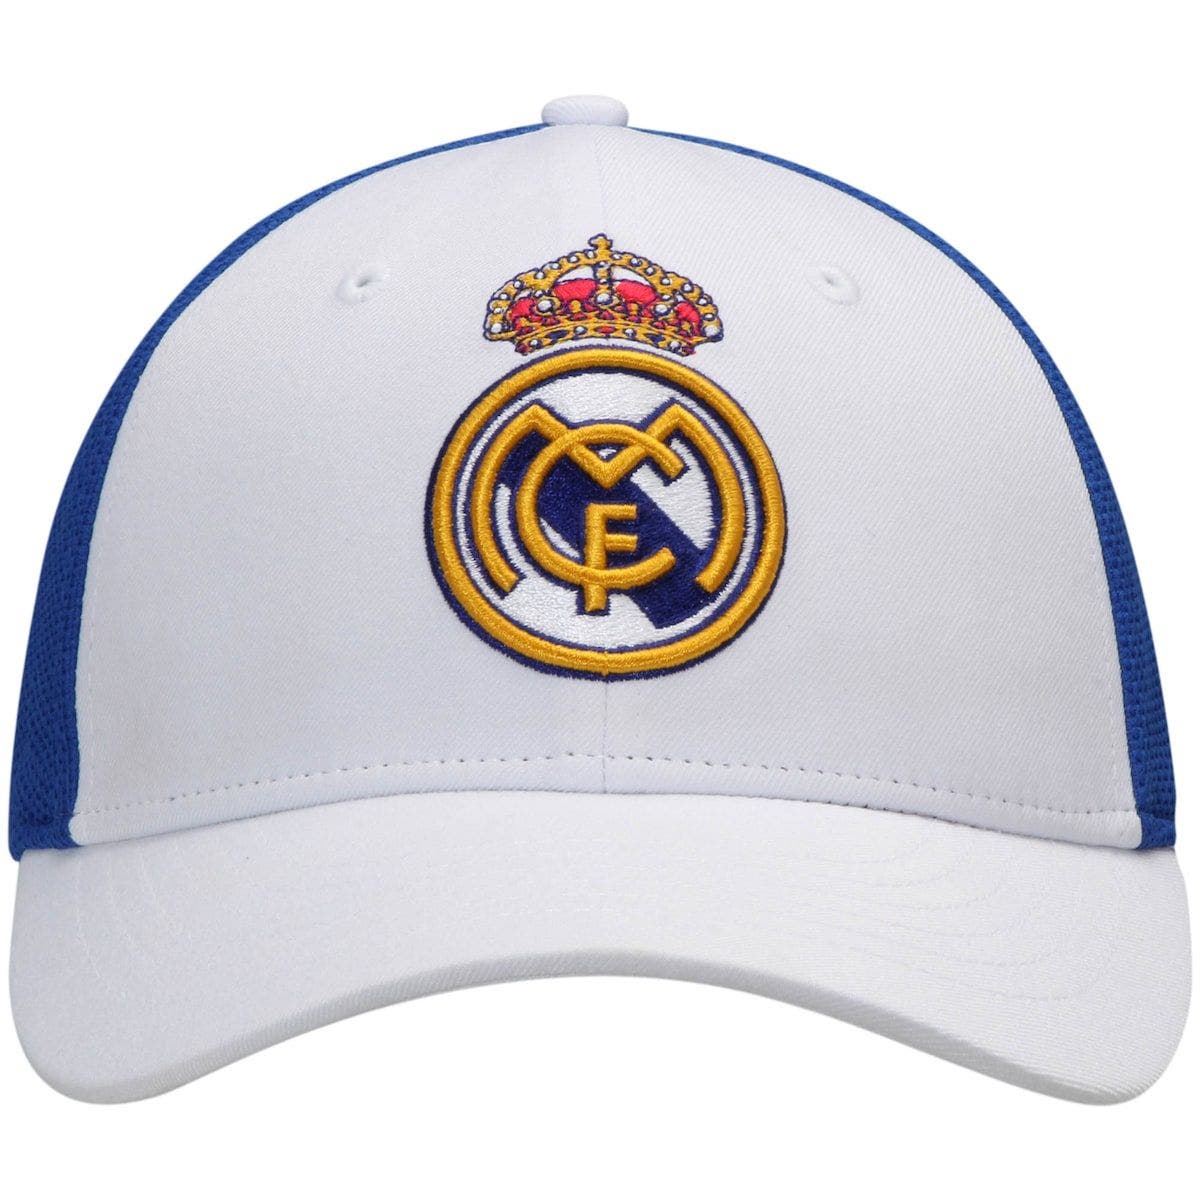 Real Madrid New Embroidered Authentic Adjustable Baseball Cap Color White 